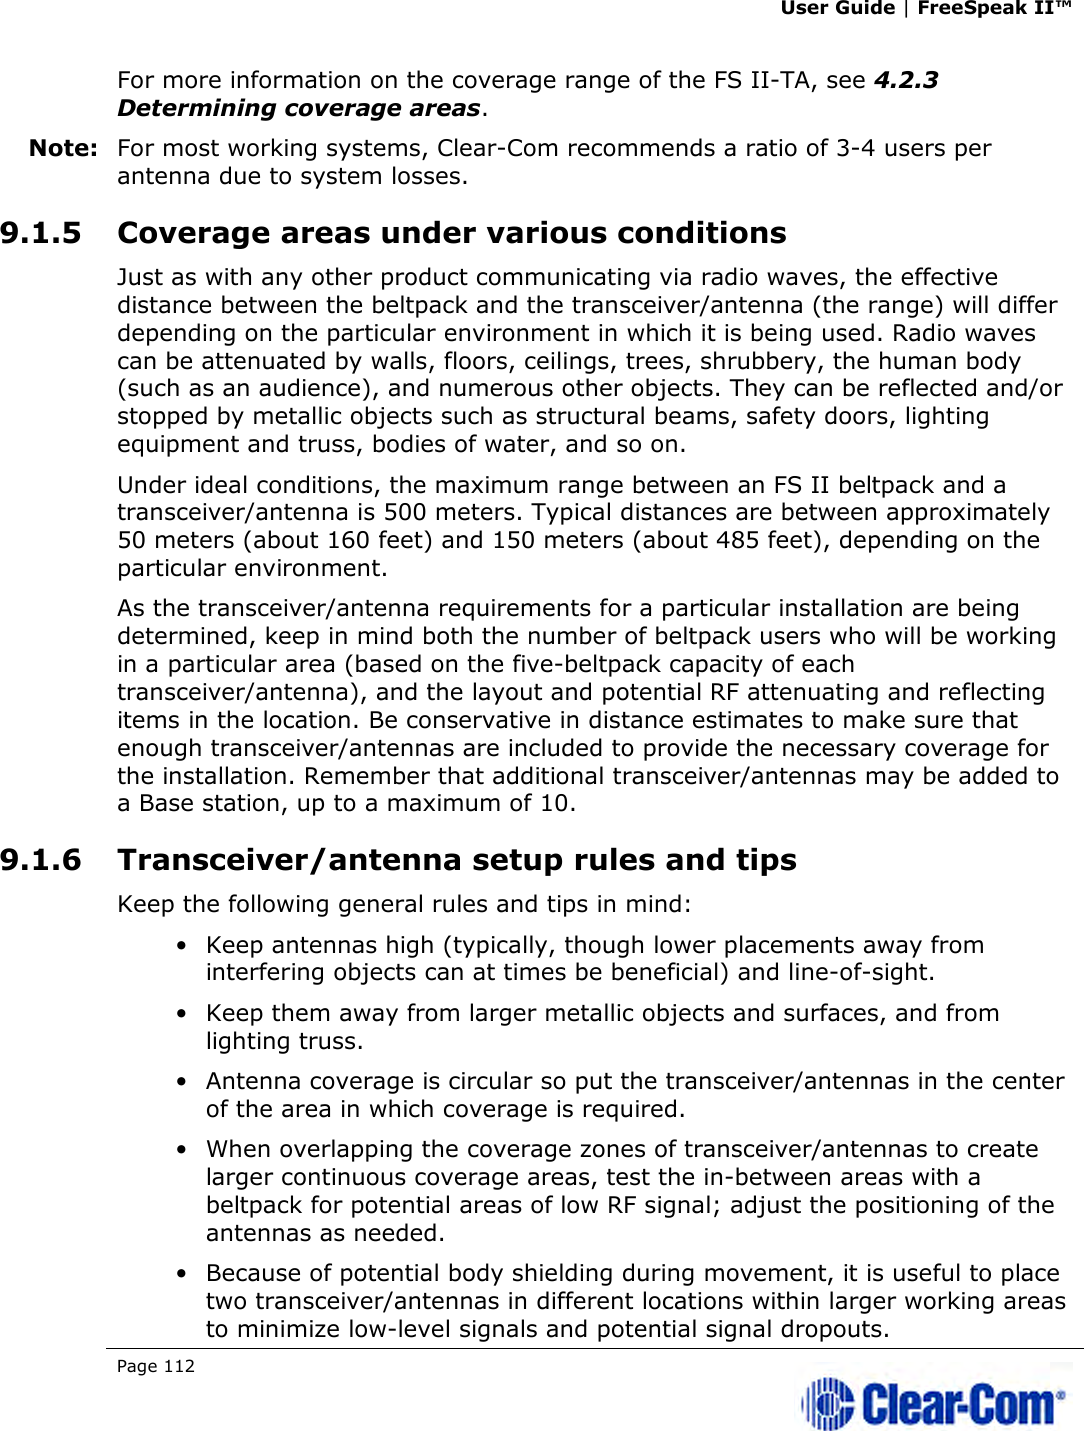 User Guide | FreeSpeak II™  Page 112   For more information on the coverage range of the FS II-TA, see 4.2.3 Determining coverage areas.  Note: For most working systems, Clear-Com recommends a ratio of 3-4 users per antenna due to system losses. 9.1.5 Coverage areas under various conditions Just as with any other product communicating via radio waves, the effective distance between the beltpack and the transceiver/antenna (the range) will differ depending on the particular environment in which it is being used. Radio waves can be attenuated by walls, floors, ceilings, trees, shrubbery, the human body (such as an audience), and numerous other objects. They can be reflected and/or stopped by metallic objects such as structural beams, safety doors, lighting equipment and truss, bodies of water, and so on.  Under ideal conditions, the maximum range between an FS II beltpack and a transceiver/antenna is 500 meters. Typical distances are between approximately 50 meters (about 160 feet) and 150 meters (about 485 feet), depending on the particular environment.  As the transceiver/antenna requirements for a particular installation are being determined, keep in mind both the number of beltpack users who will be working in a particular area (based on the five-beltpack capacity of each transceiver/antenna), and the layout and potential RF attenuating and reflecting items in the location. Be conservative in distance estimates to make sure that enough transceiver/antennas are included to provide the necessary coverage for the installation. Remember that additional transceiver/antennas may be added to a Base station, up to a maximum of 10. 9.1.6 Transceiver/antenna setup rules and tips Keep the following general rules and tips in mind: • Keep antennas high (typically, though lower placements away from interfering objects can at times be beneficial) and line-of-sight. • Keep them away from larger metallic objects and surfaces, and from lighting truss.  • Antenna coverage is circular so put the transceiver/antennas in the center of the area in which coverage is required. • When overlapping the coverage zones of transceiver/antennas to create larger continuous coverage areas, test the in-between areas with a beltpack for potential areas of low RF signal; adjust the positioning of the antennas as needed. • Because of potential body shielding during movement, it is useful to place two transceiver/antennas in different locations within larger working areas to minimize low-level signals and potential signal dropouts. 